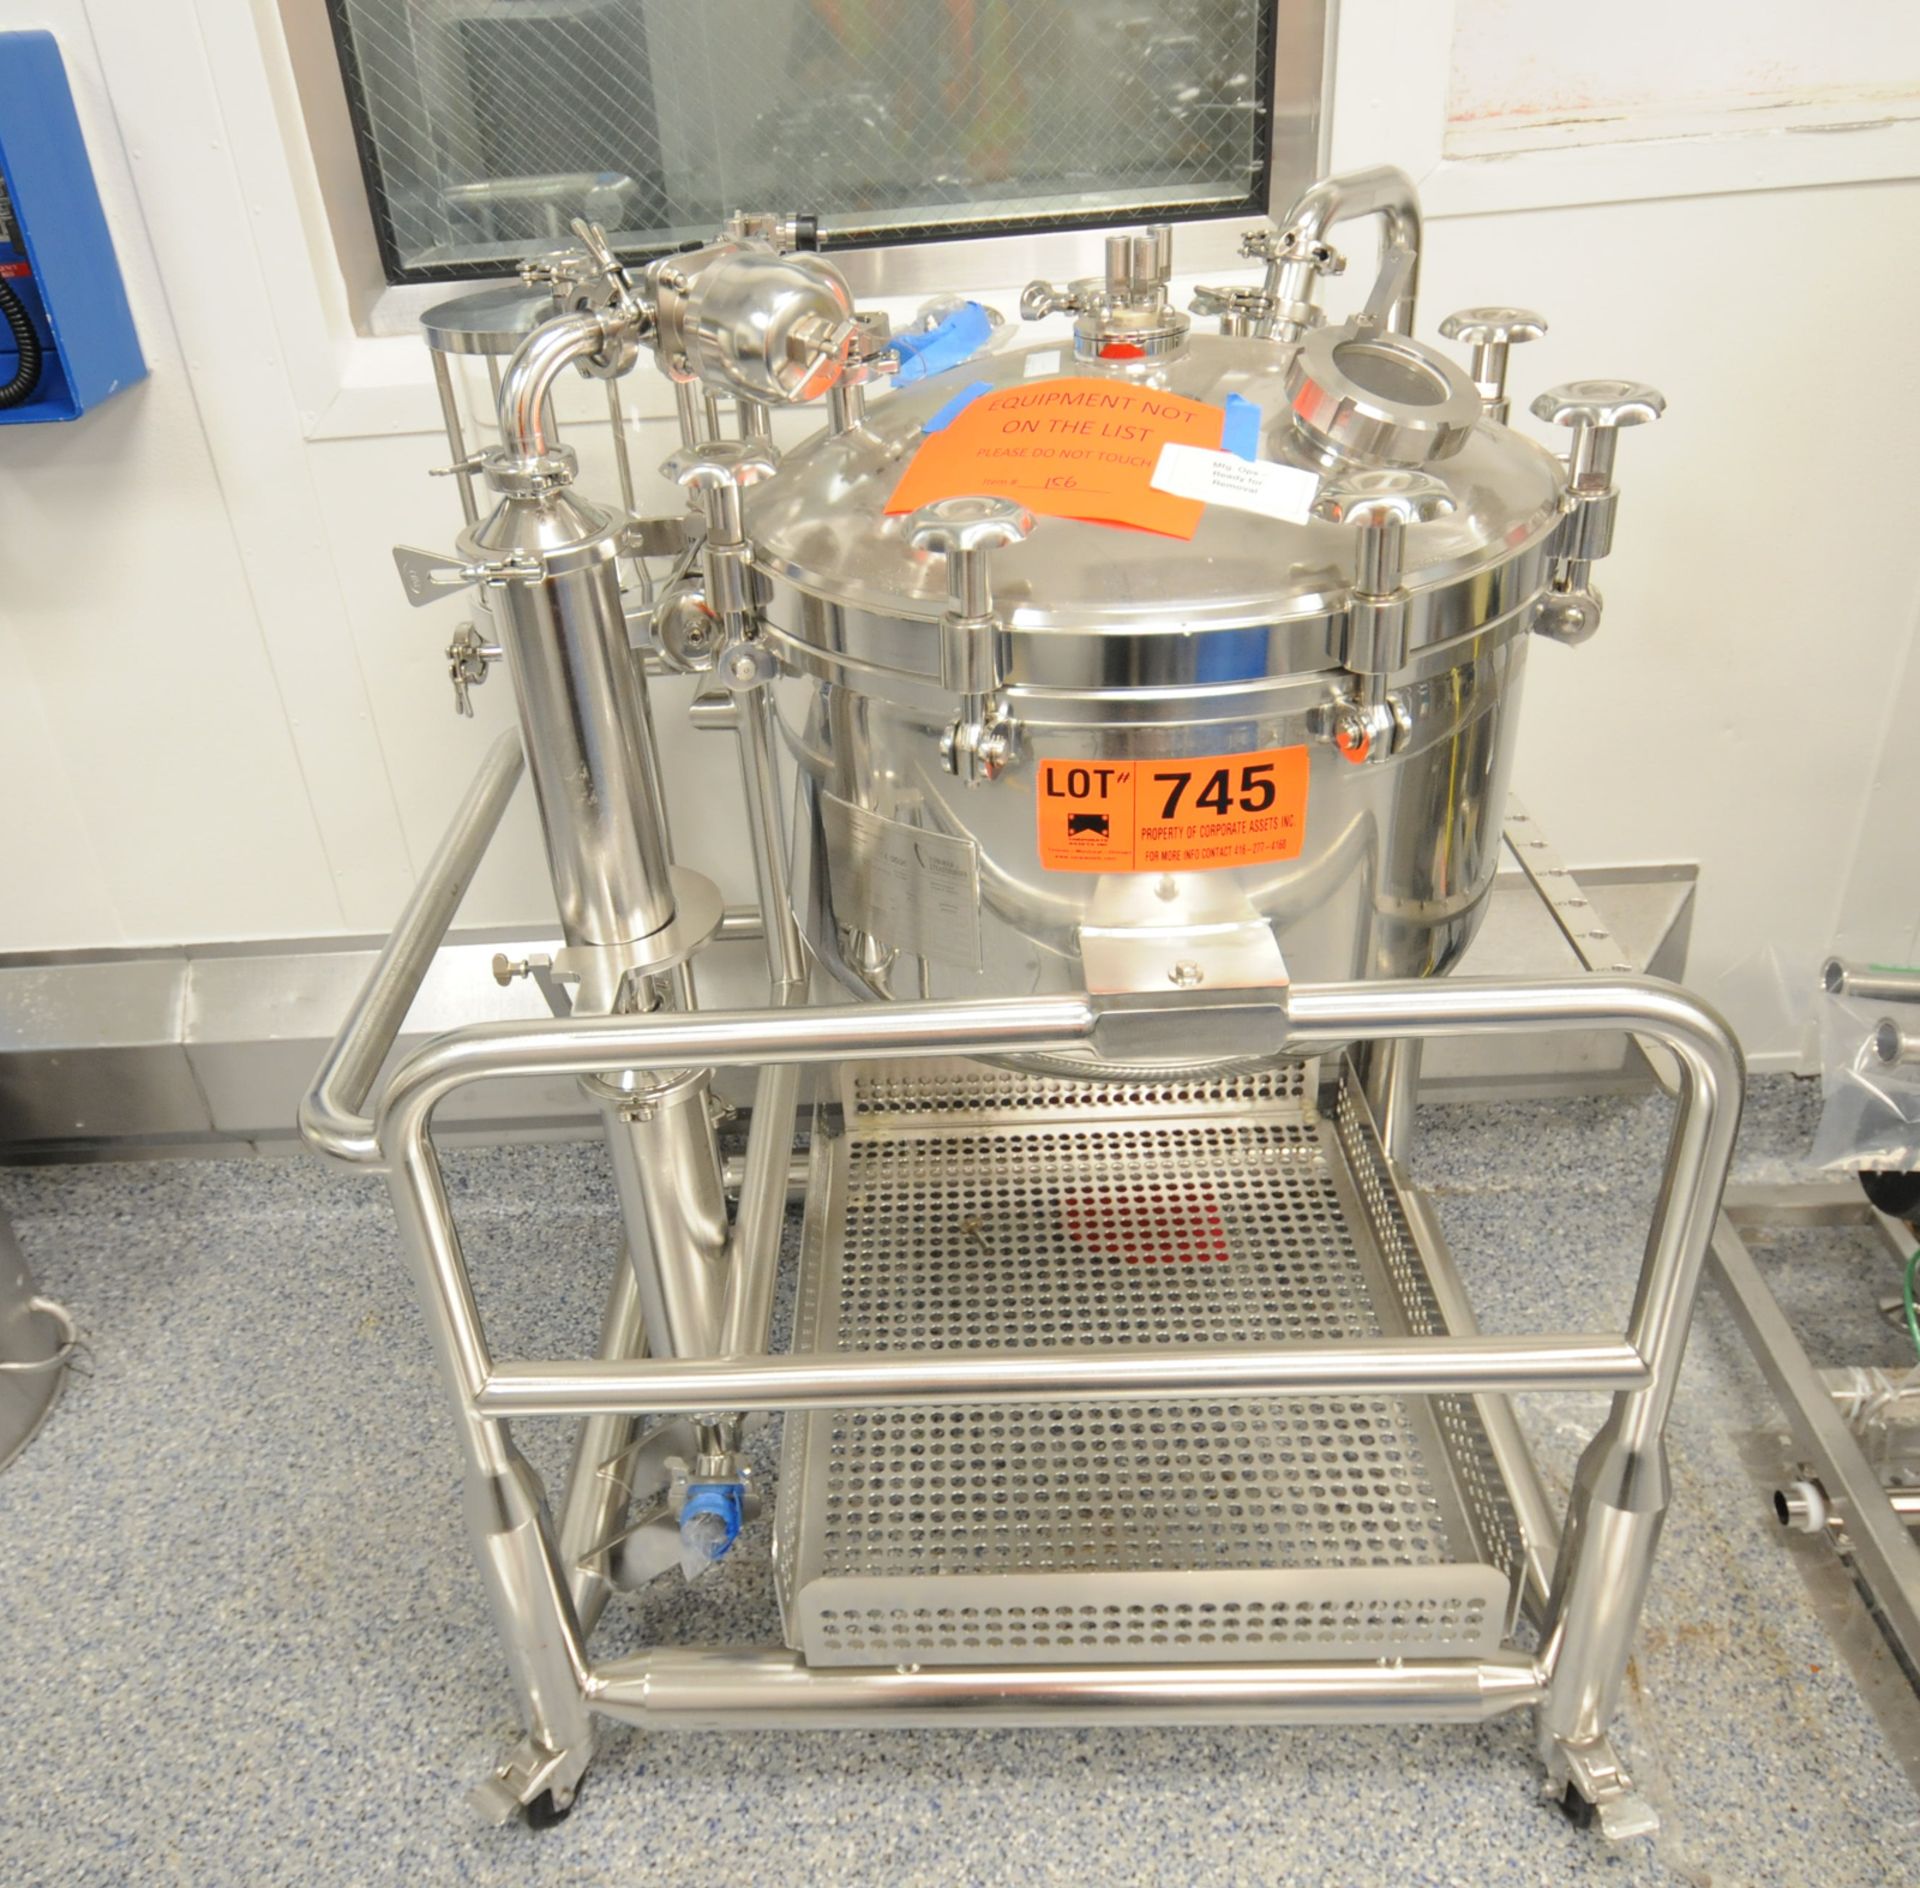 SOMMER & STRASSBURGER (2013) RAUM/CHAMBER STAINLESS STEEL CART MOUNTED PORTABLE REACTOR VESSEL